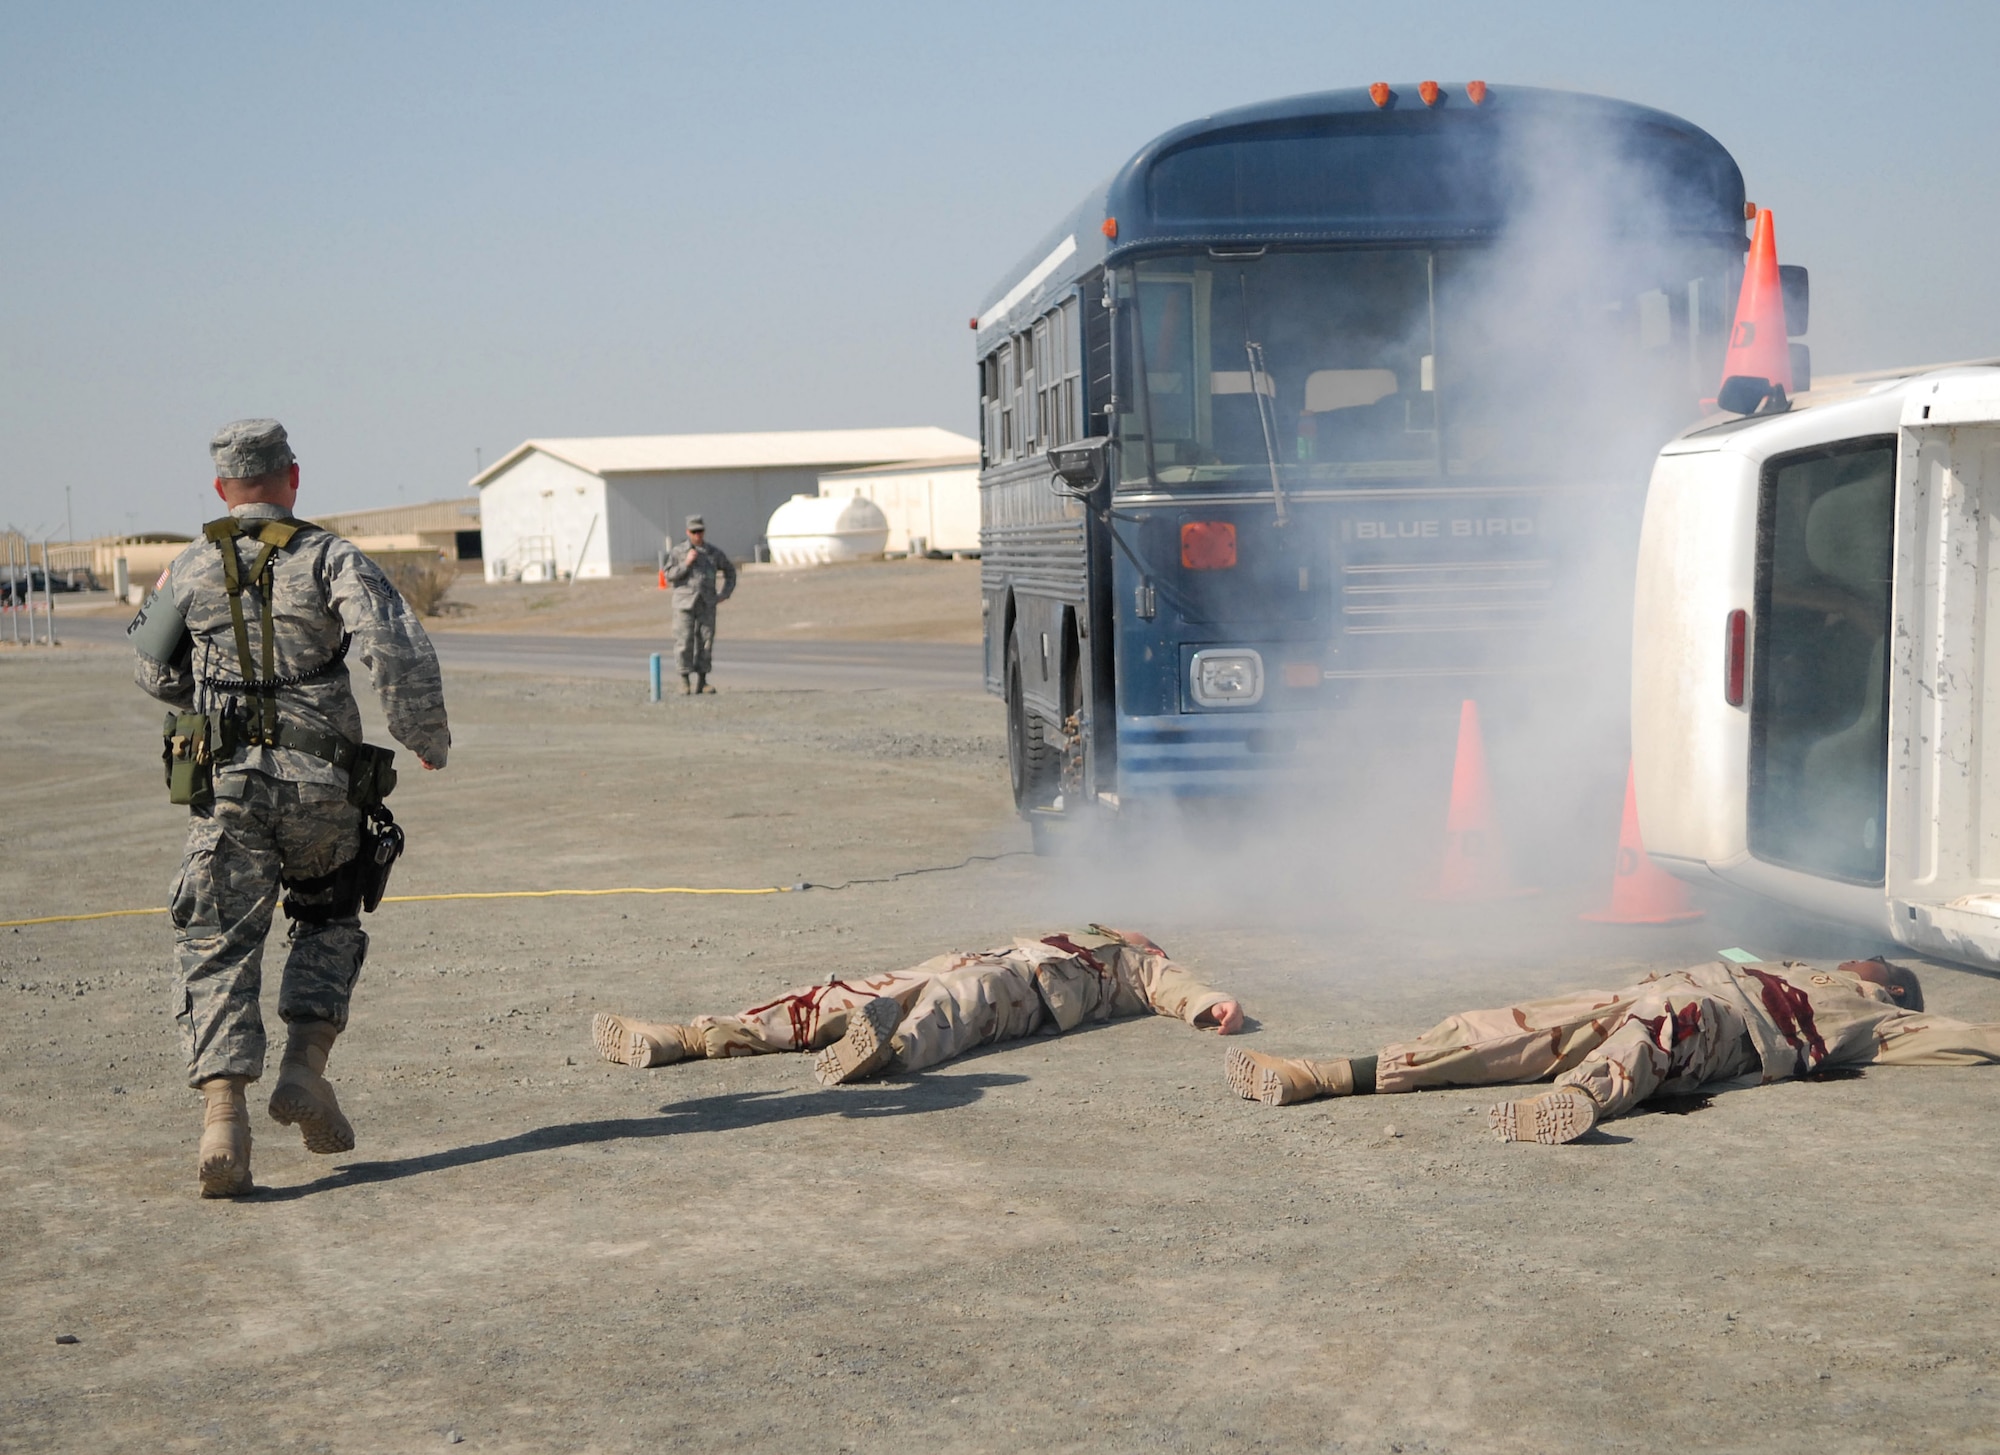 SOUTHWEST ASIA -- A member of the 380th Expeditionary Security Forces Squadron is the first to respond to simulated victims at the scene of a simulated terrorist attack here Dec. 12. Make up is applied to the simulated, or moulage, victims to lend an air of reality to the situation. The deployed Airmen are all part of an exercise which tests and evaluates the 380th Air Expeditionary Wing's response to real-world scenarios. (US Air Force photo by Tech. Sgt. Denise Johnson) (released)